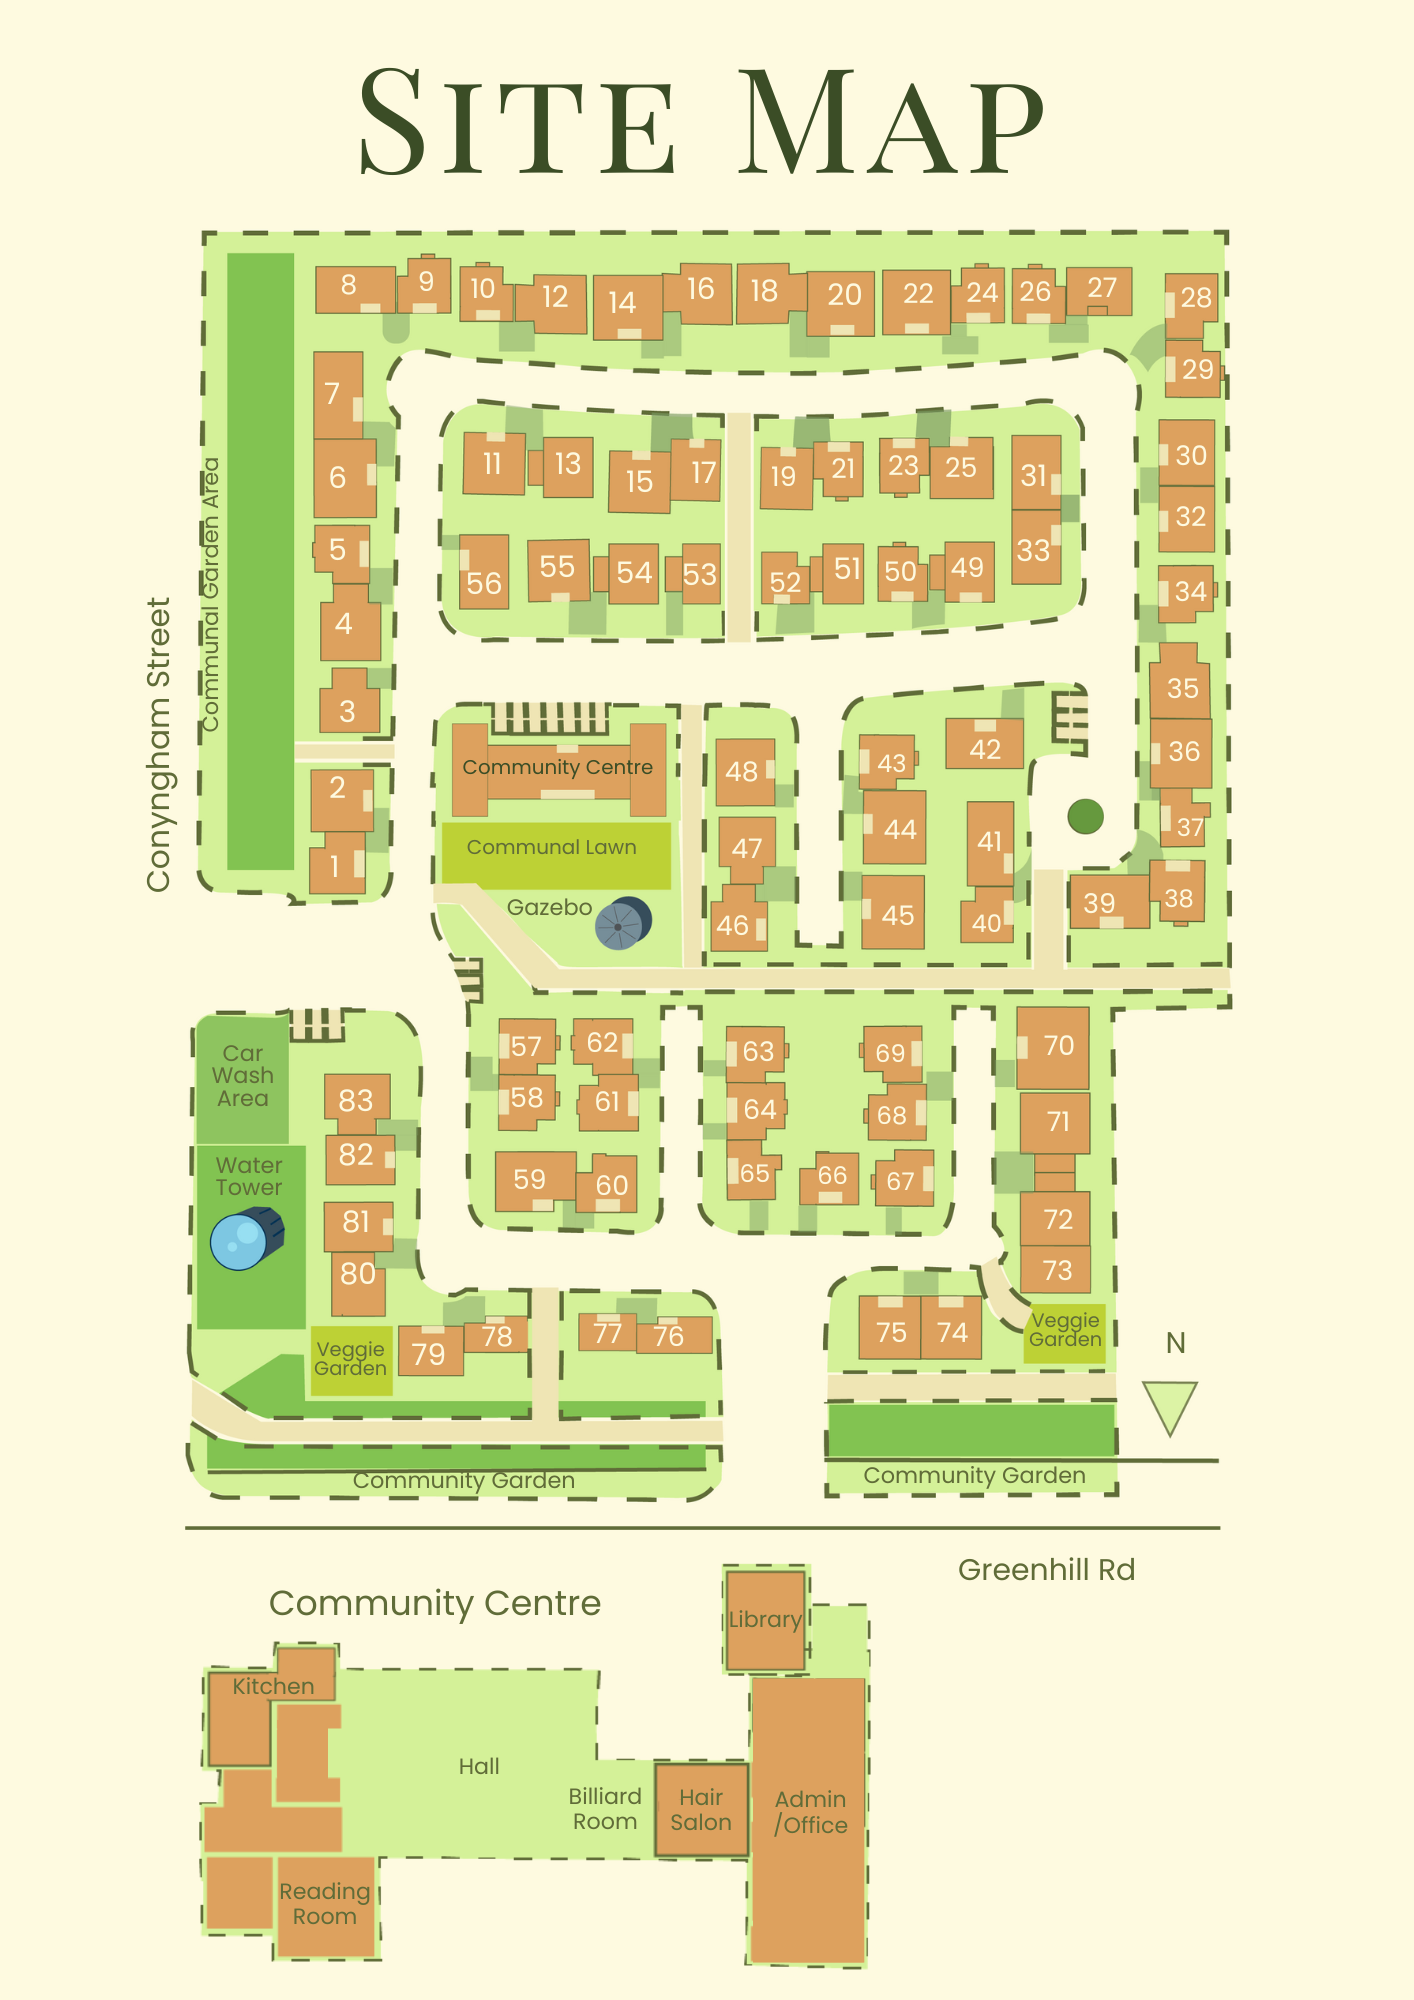 Map of Pineview Retirement Village in Burnside, South Australia